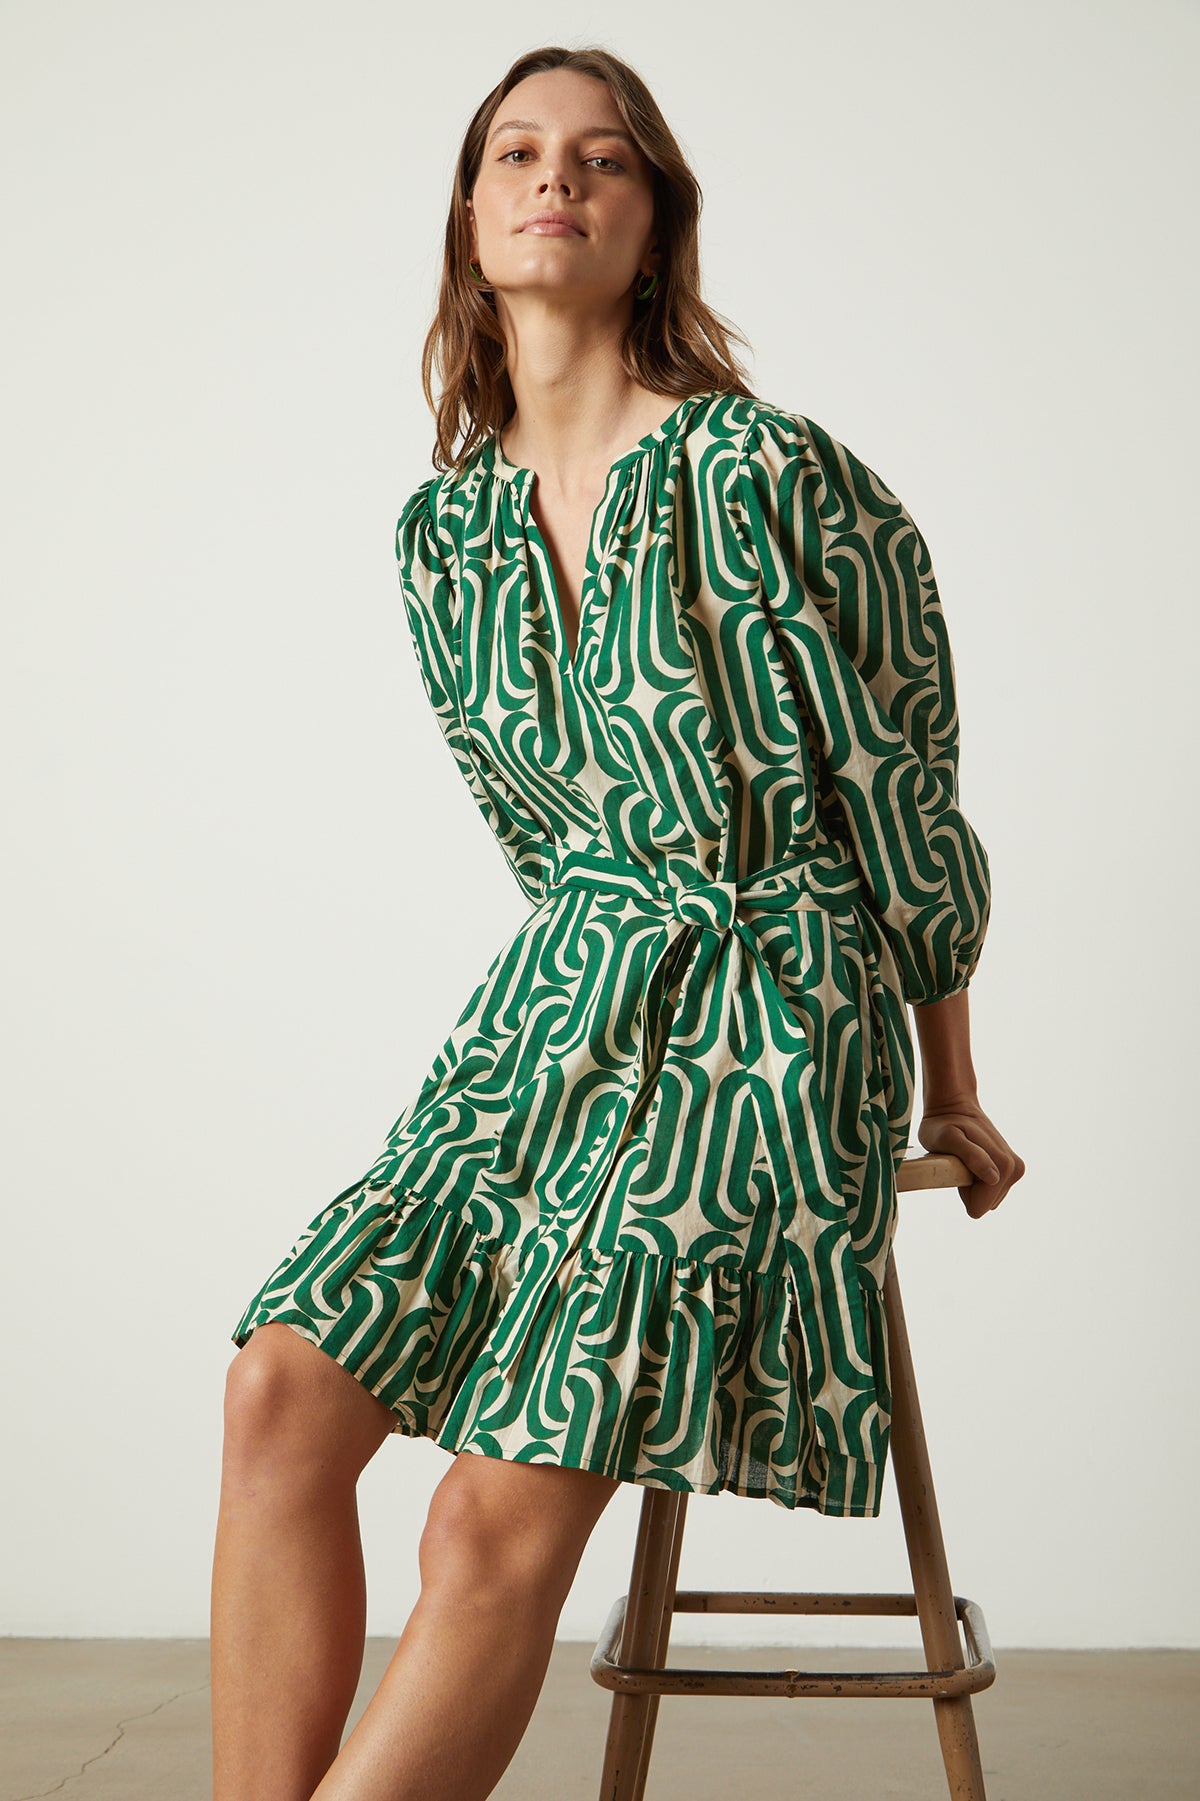   A woman is sitting on a stool wearing a FELICITY PRINTED BOHO DRESS by Velvet by Graham & Spencer with ruffled hemline. 